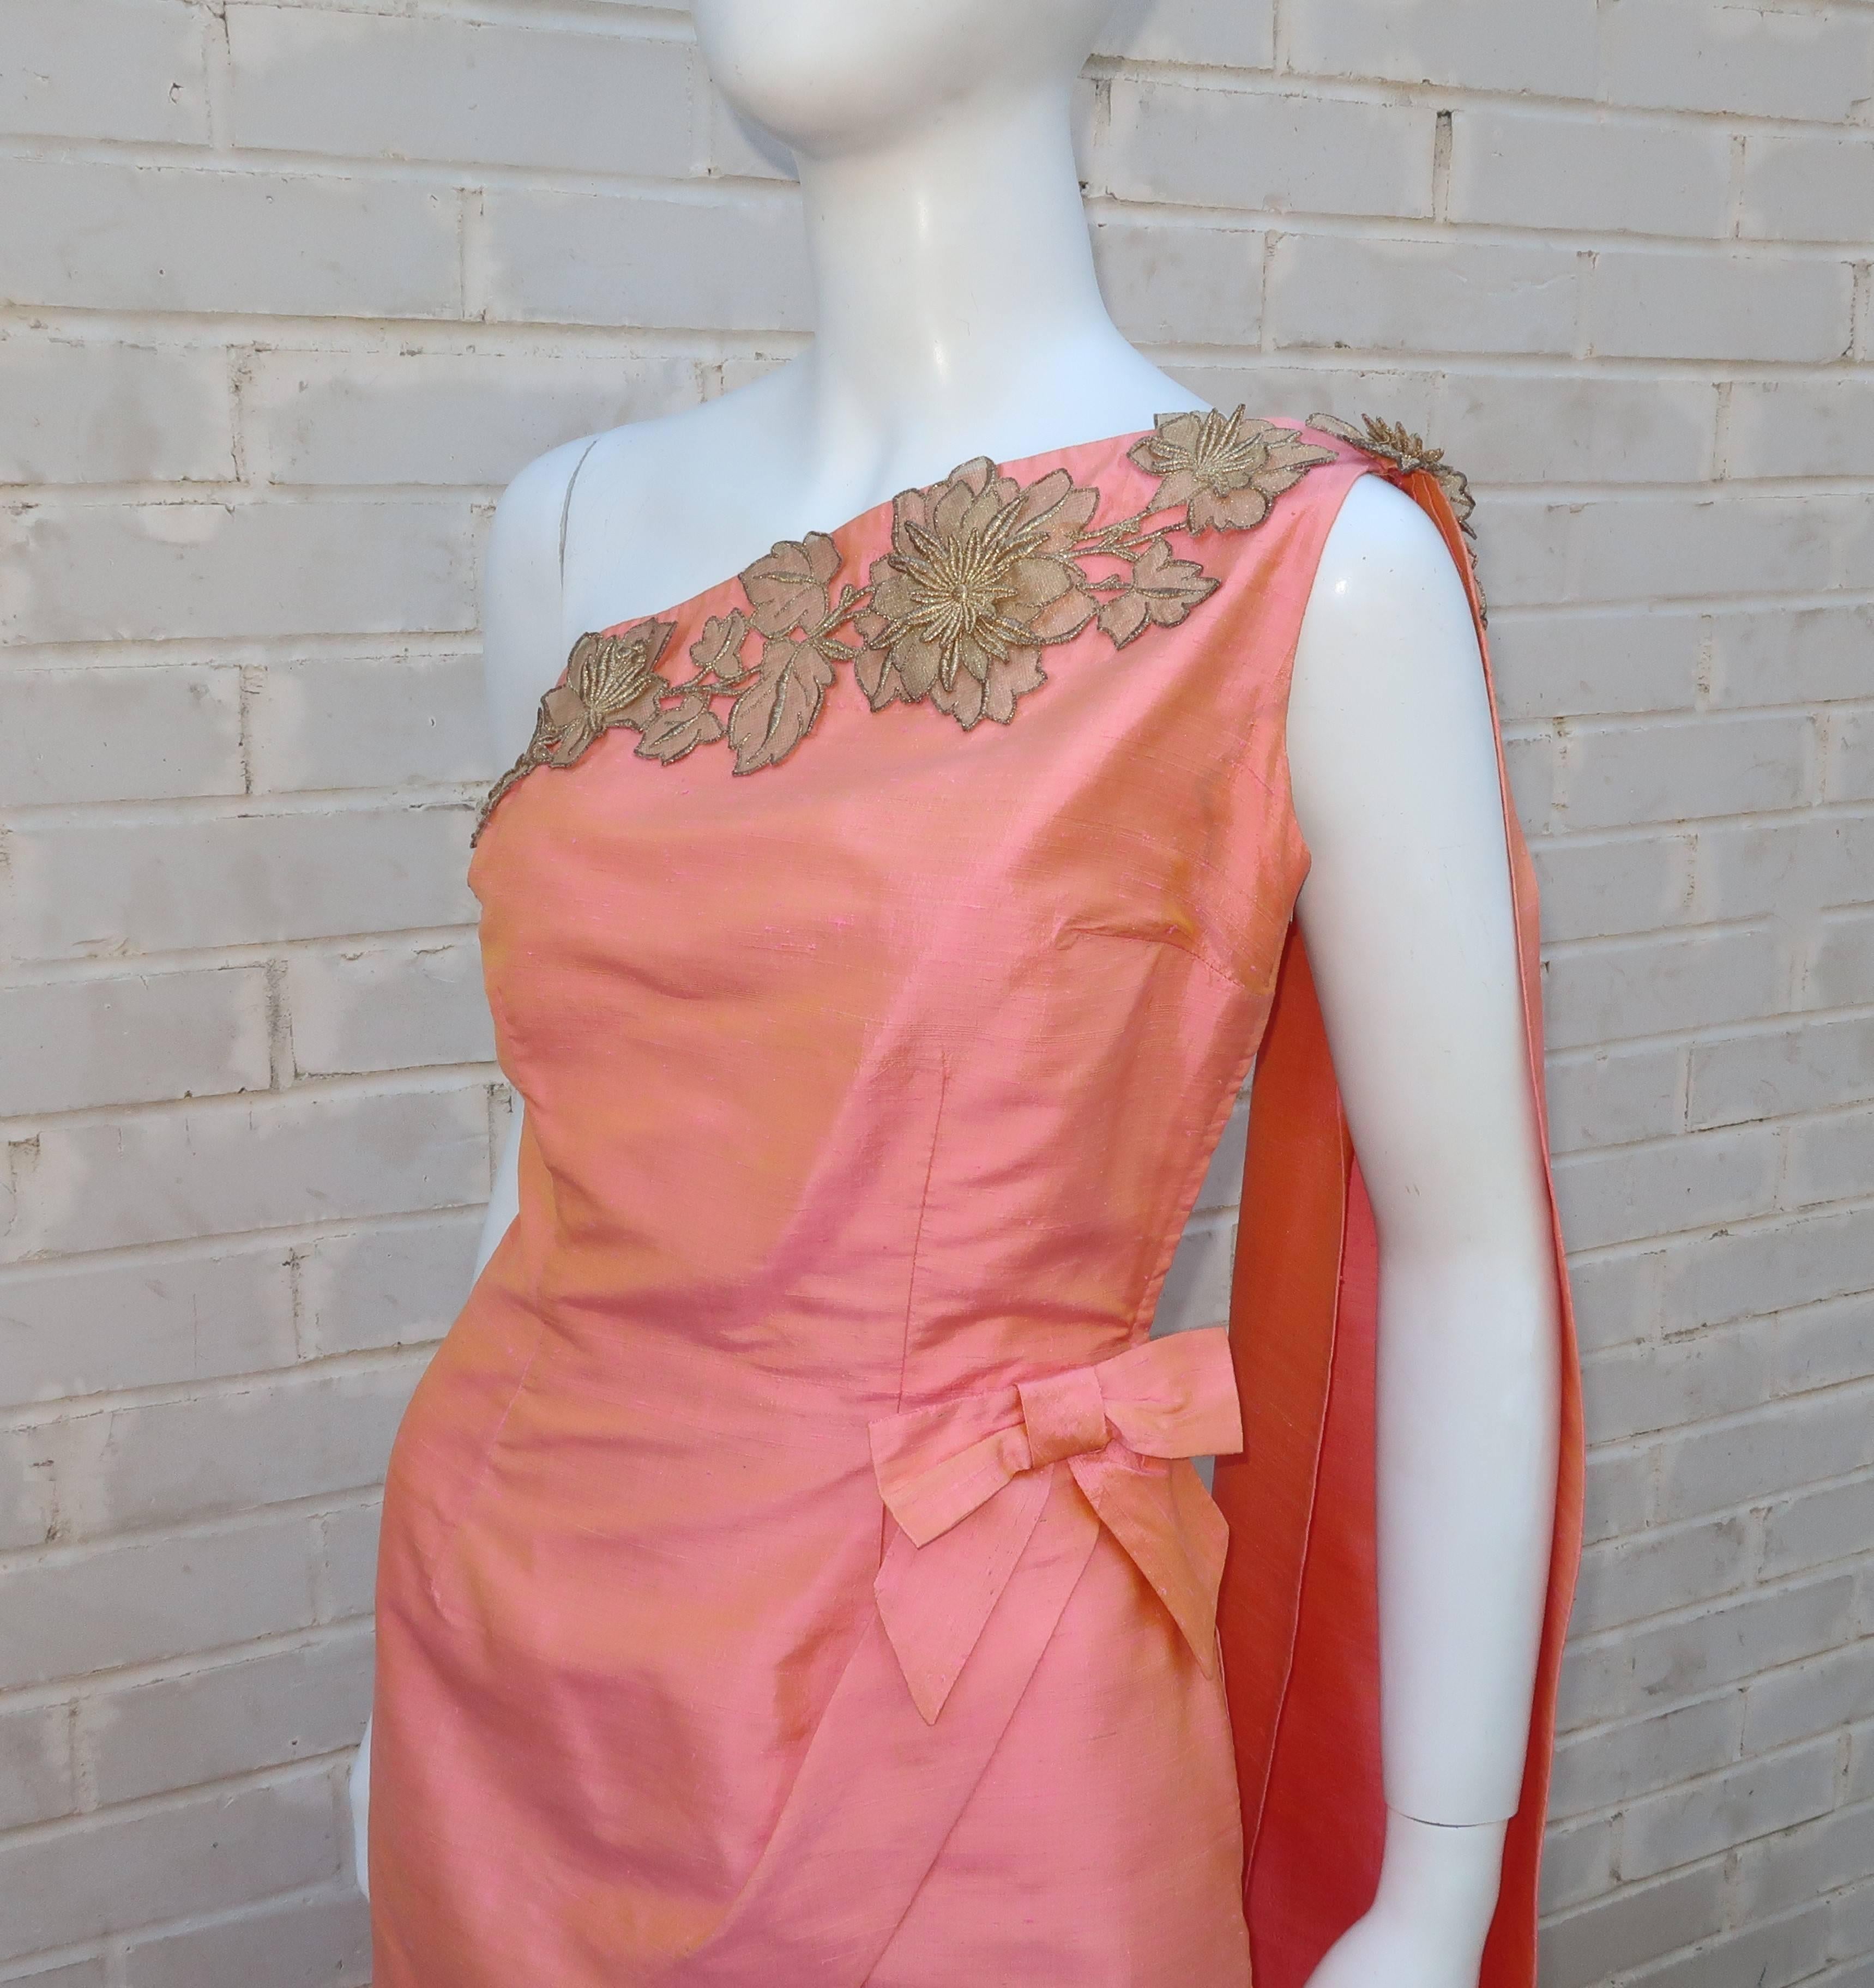 Don this 1950's custom made one-shouldered dress and bring out your inner goddess for an evening under the stars.  Everything about this heavenly silhouette is designed to emphasize the feminine form all wrapped in a peach dupioni iridescent silk